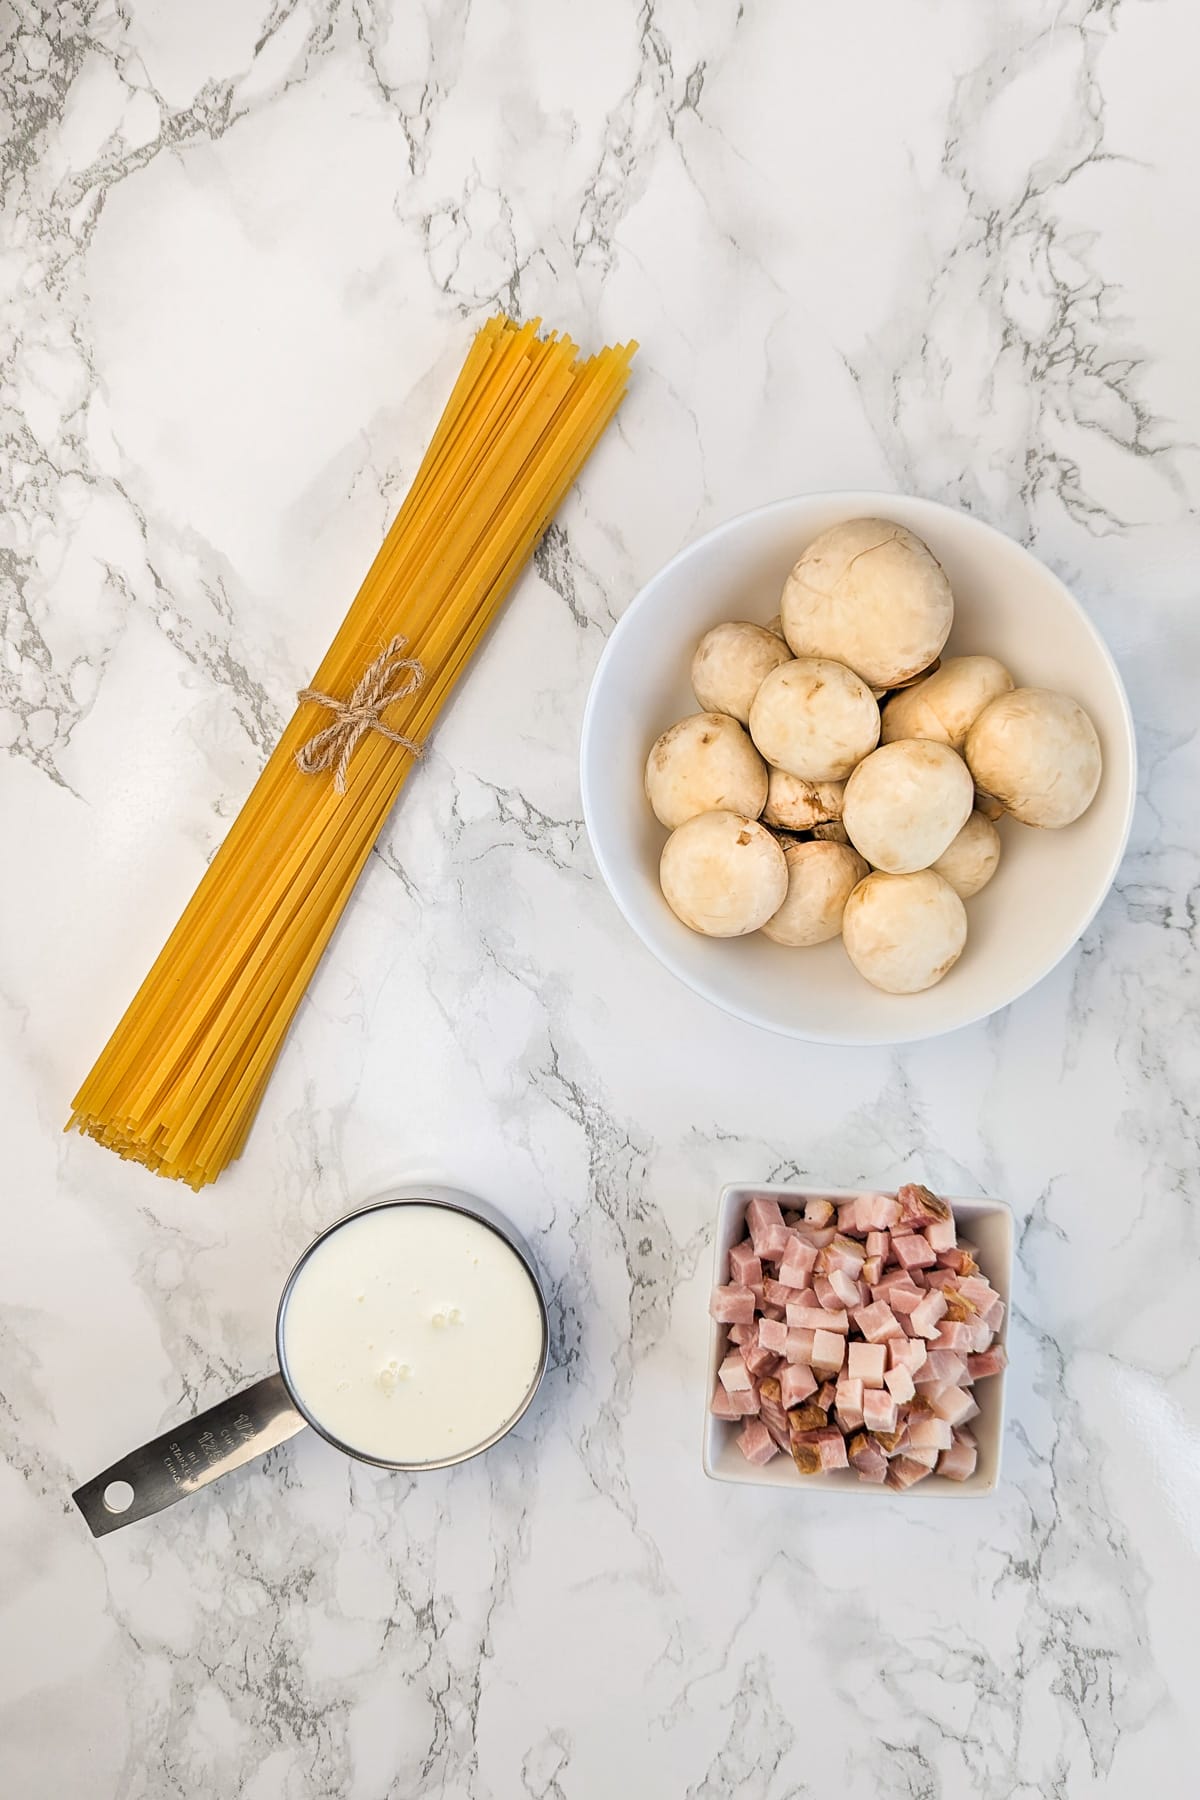 A bundle of uncooked spaghetti tied with twine, a cup of diced ham, a measuring cup of cream, and a bowl of whole mushrooms on a marble countertop.